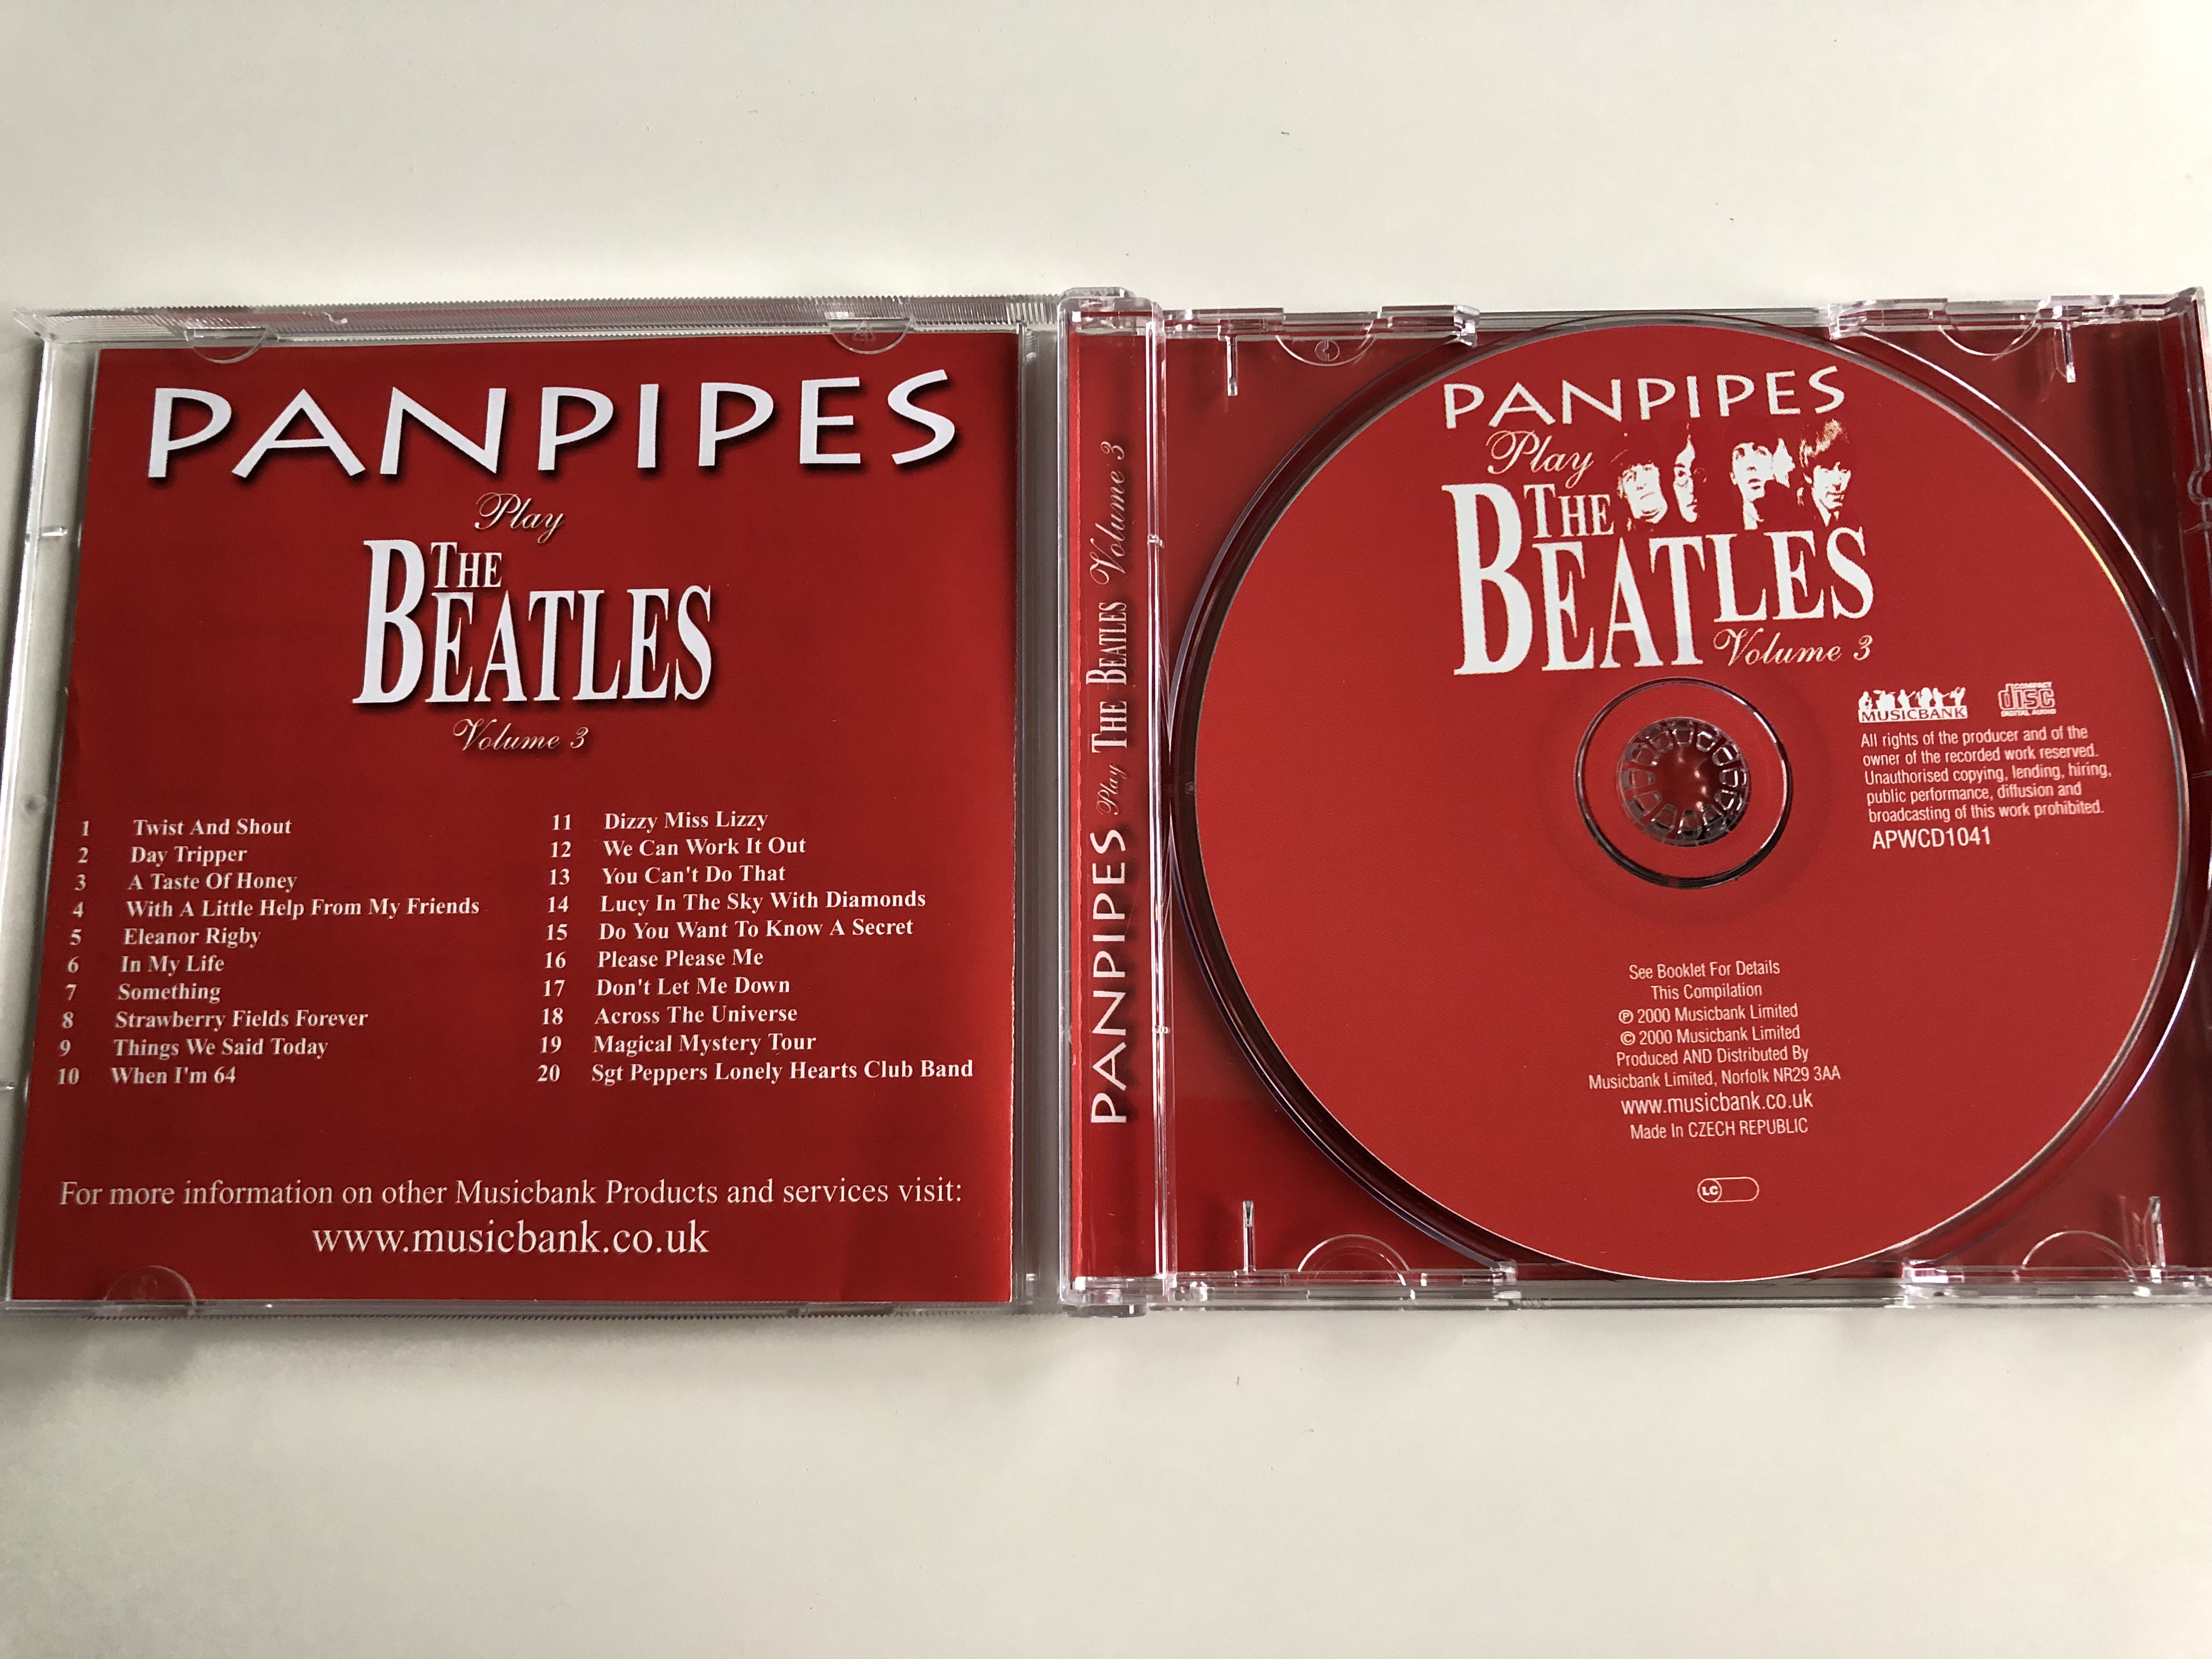 panpipes-play-the-beatles-vol.-3-includes-twist-shout-eleanor-rigby-please-please-me-something-we-can-work-it-out-audio-cd-2000-musicbank-apwcd1041-3-.jpg